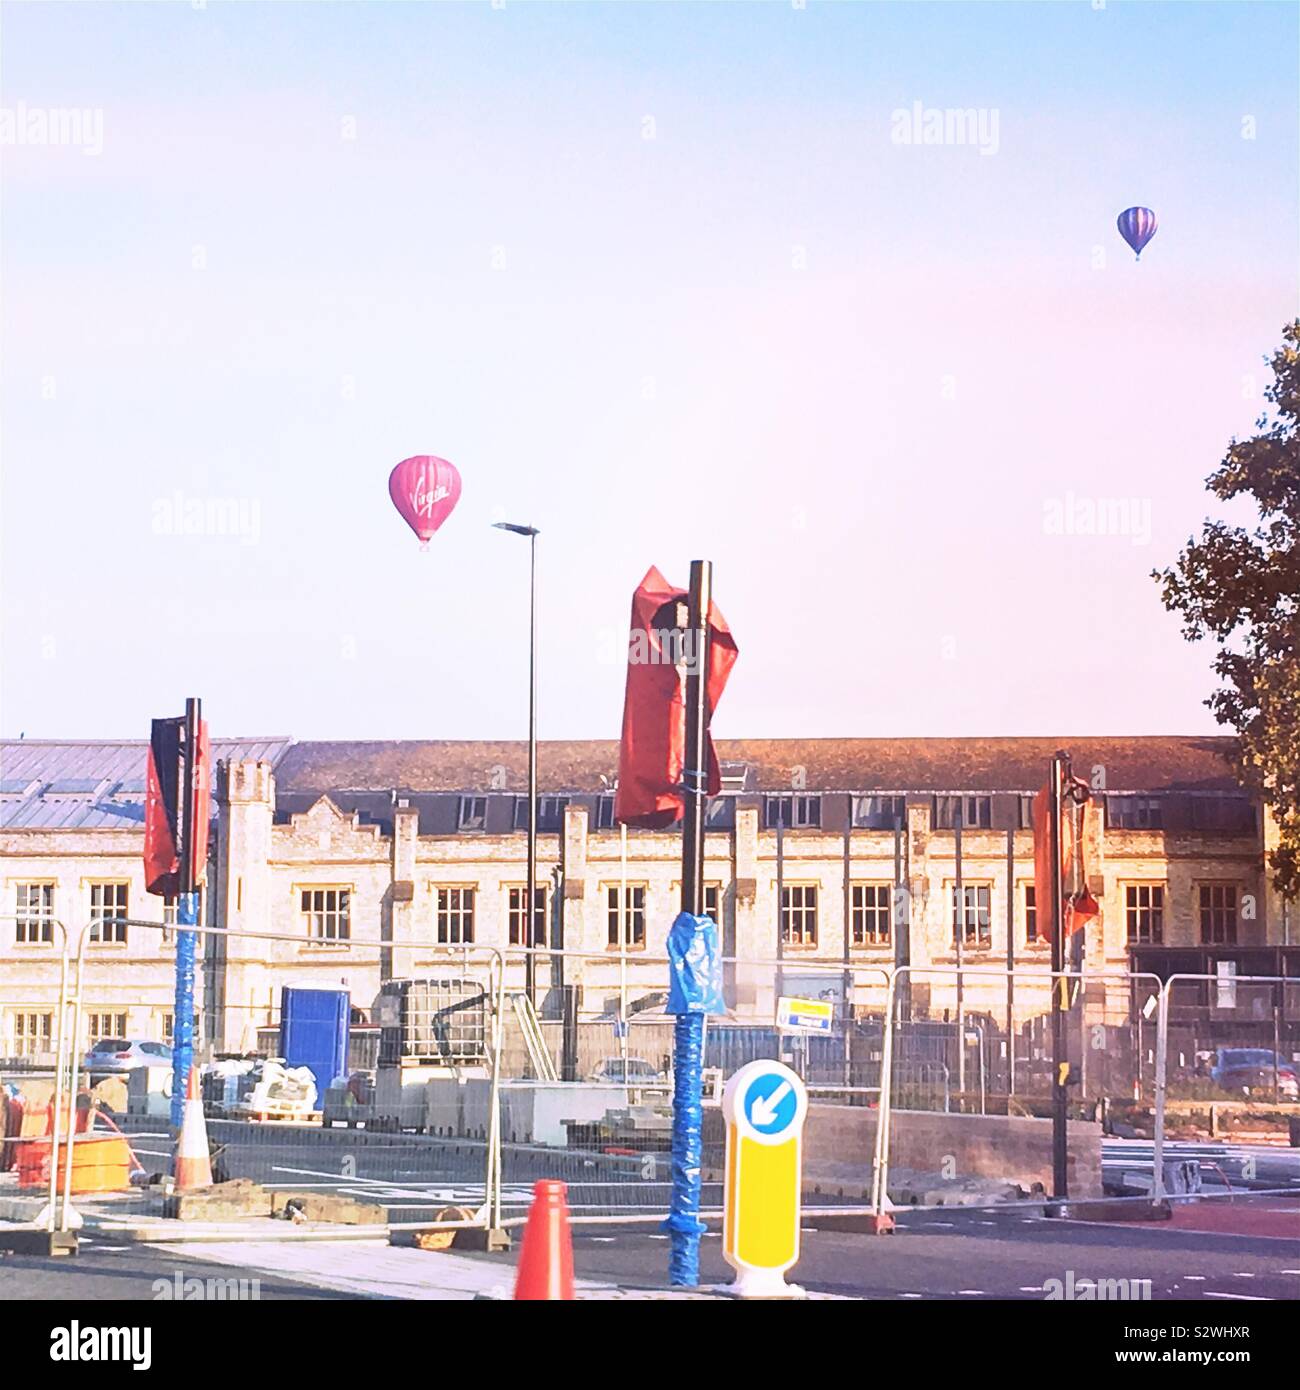 Redevelopment of the Temple Meads area of Bristol, England, with old railway buildings, covered traffic lights and hot air balloons Stock Photo